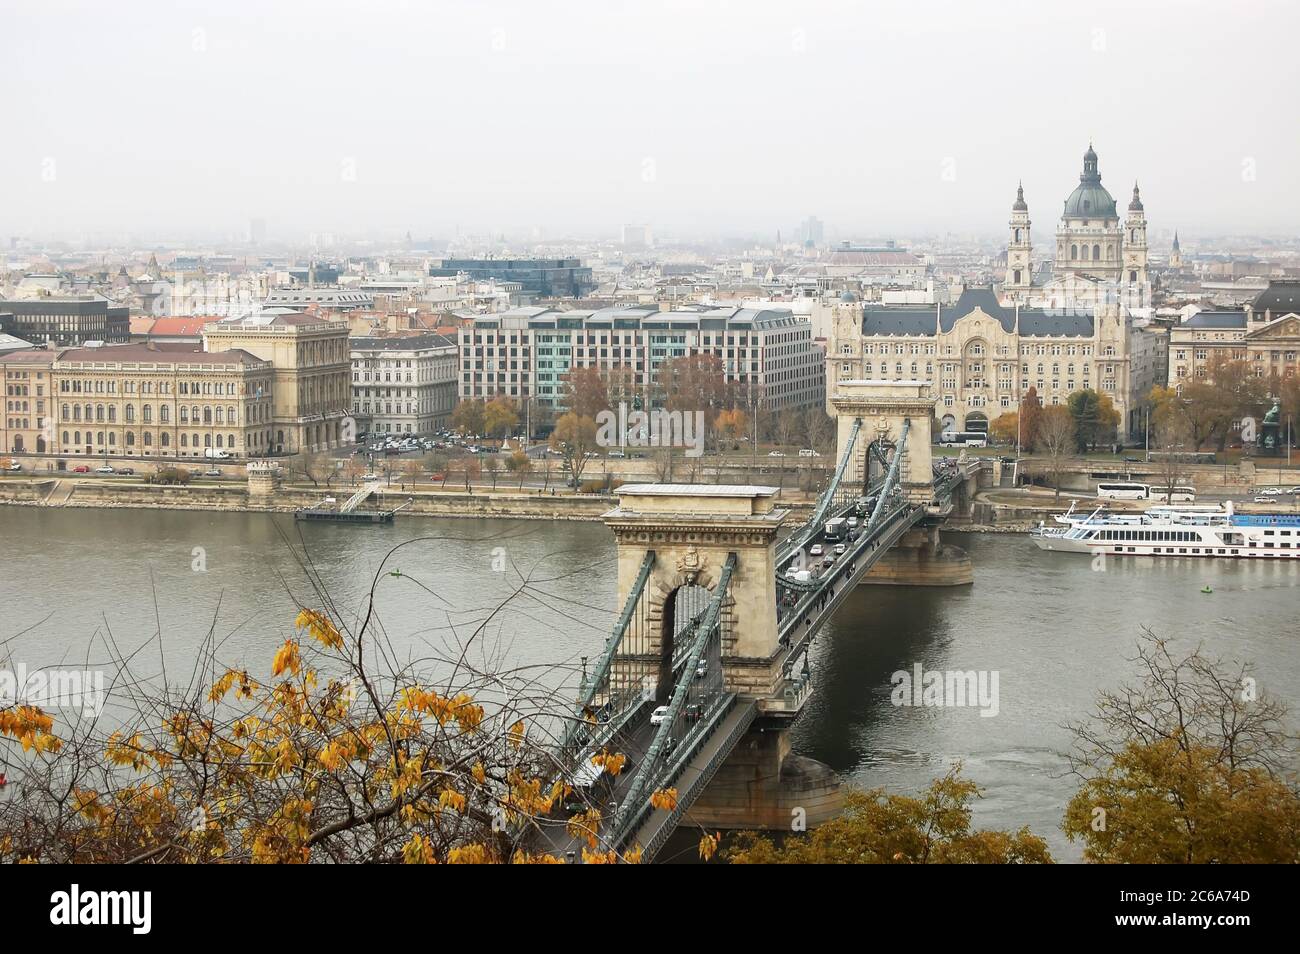 View of the Chain Bridge and Danube river in Budapest city, Hungary. Stock Photo